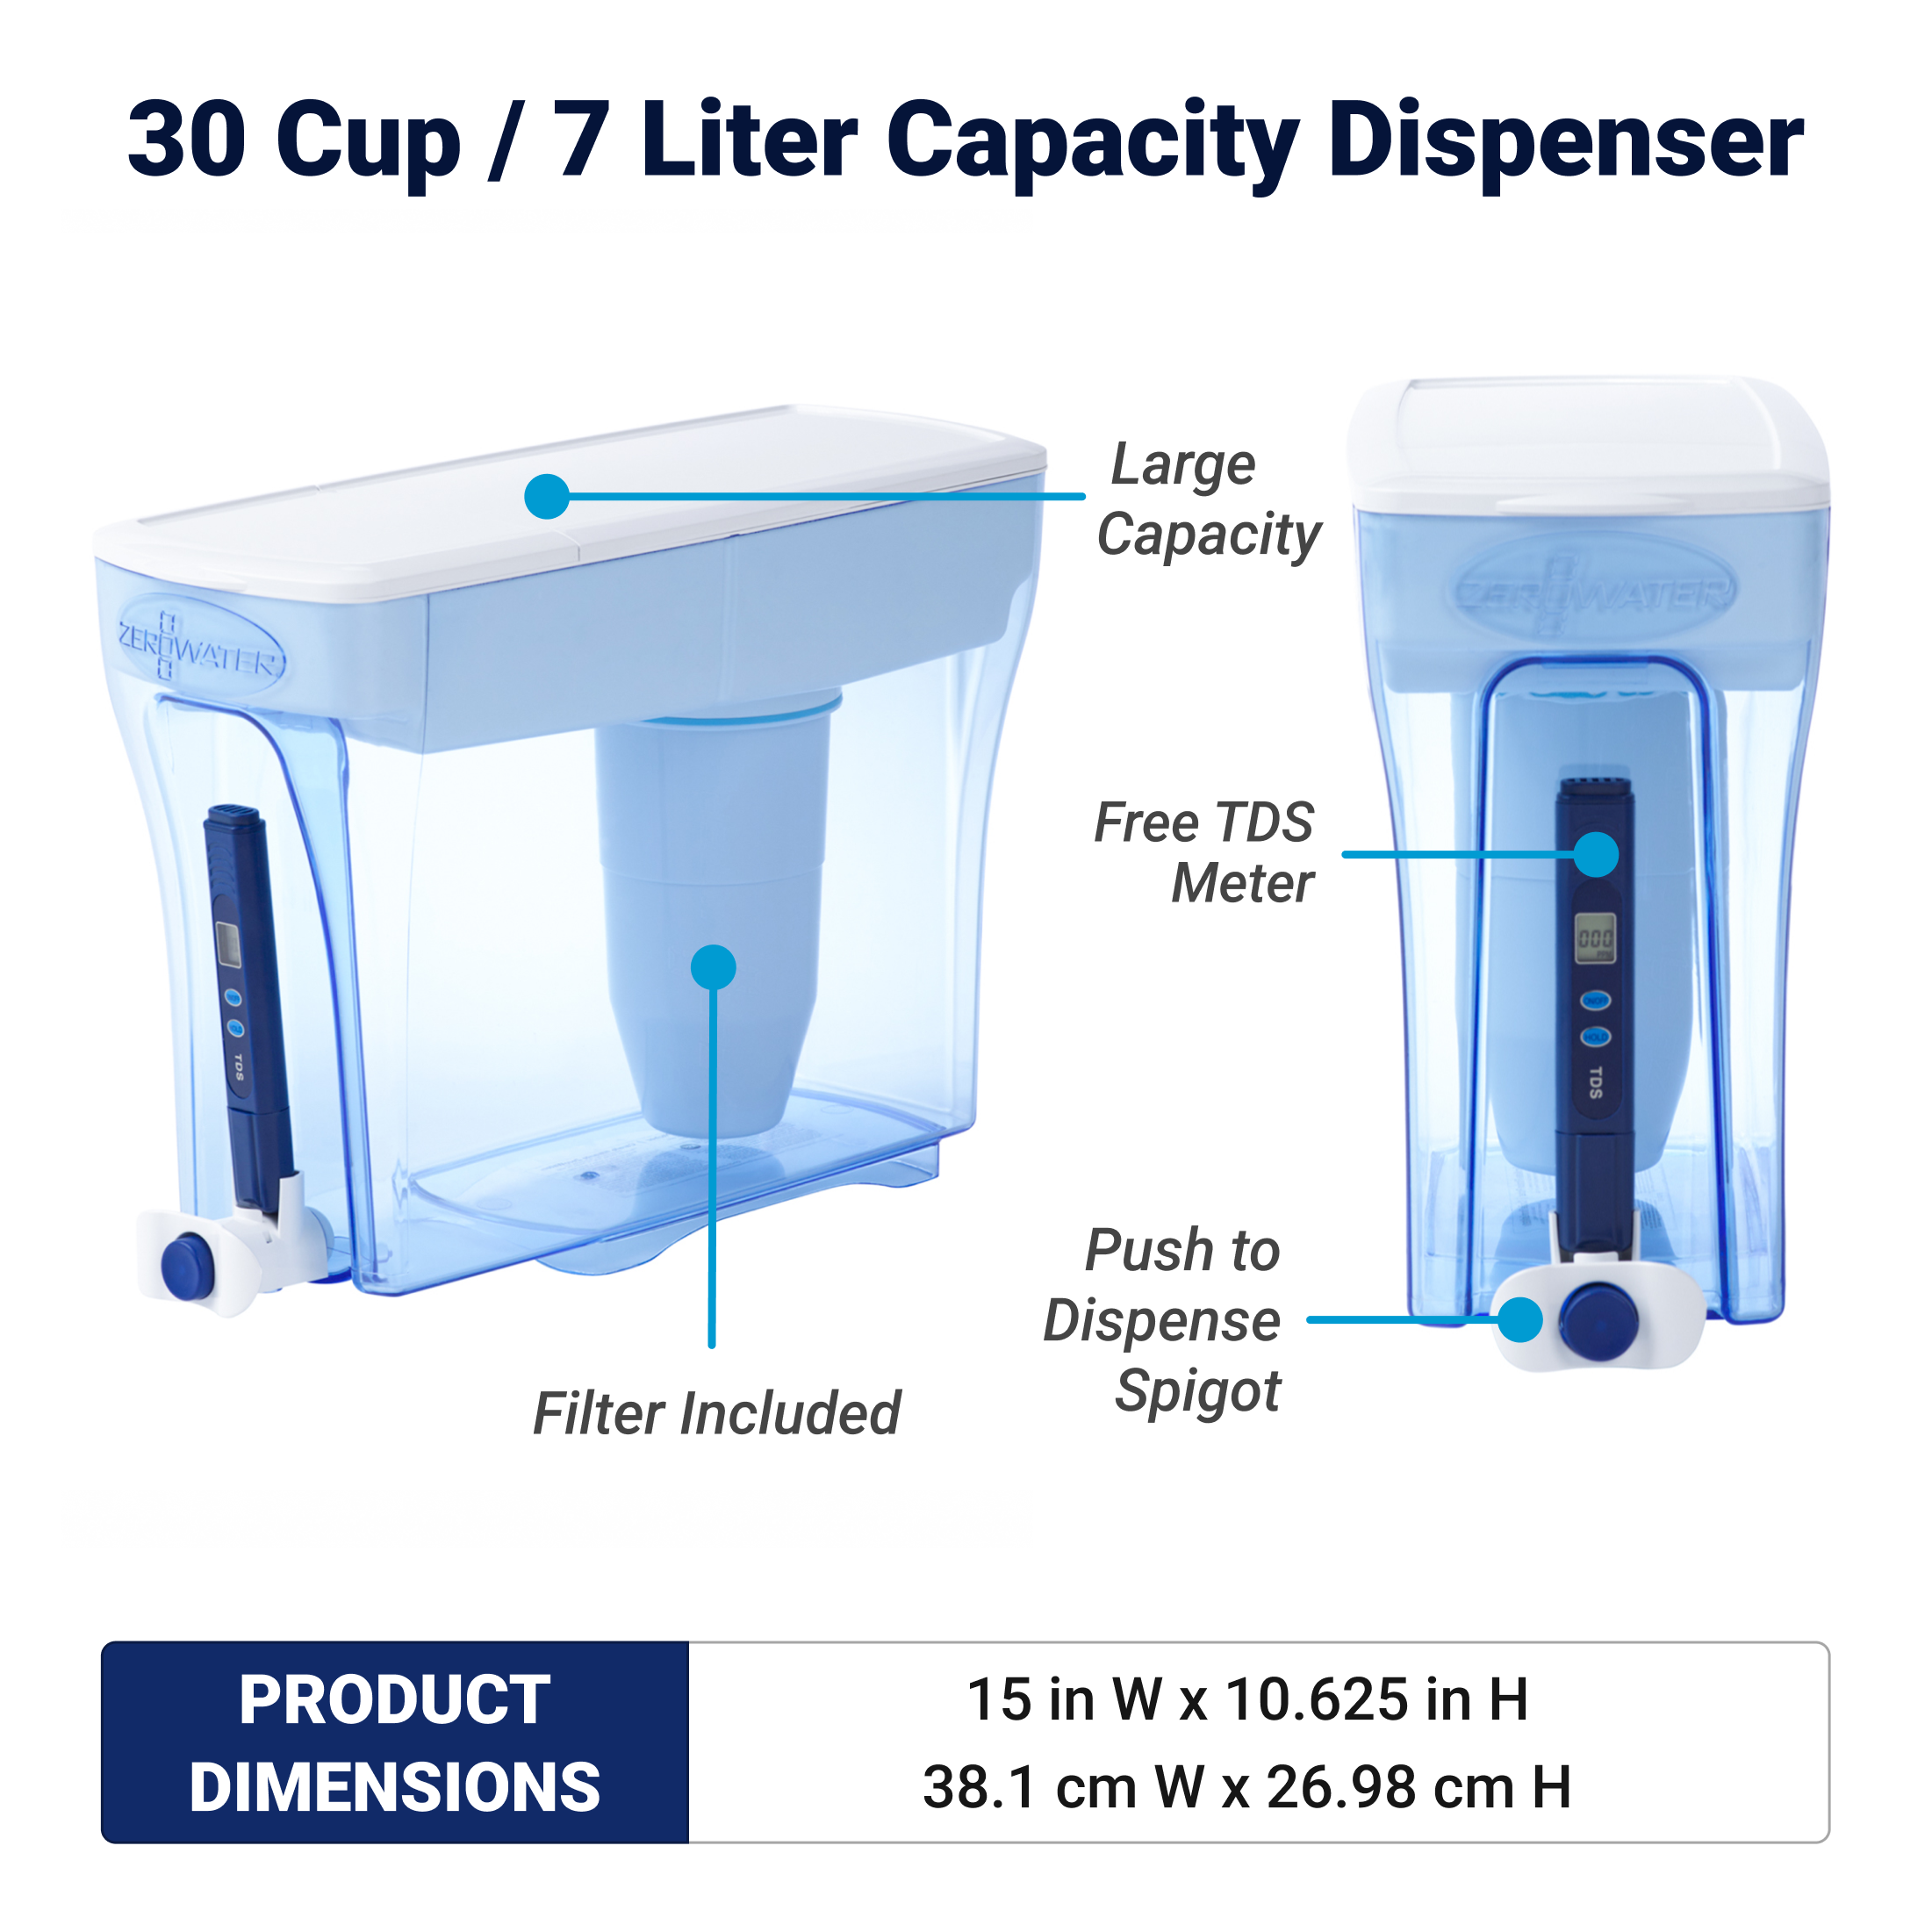 30 cup 7 liter capacity dispenser with dimensions 